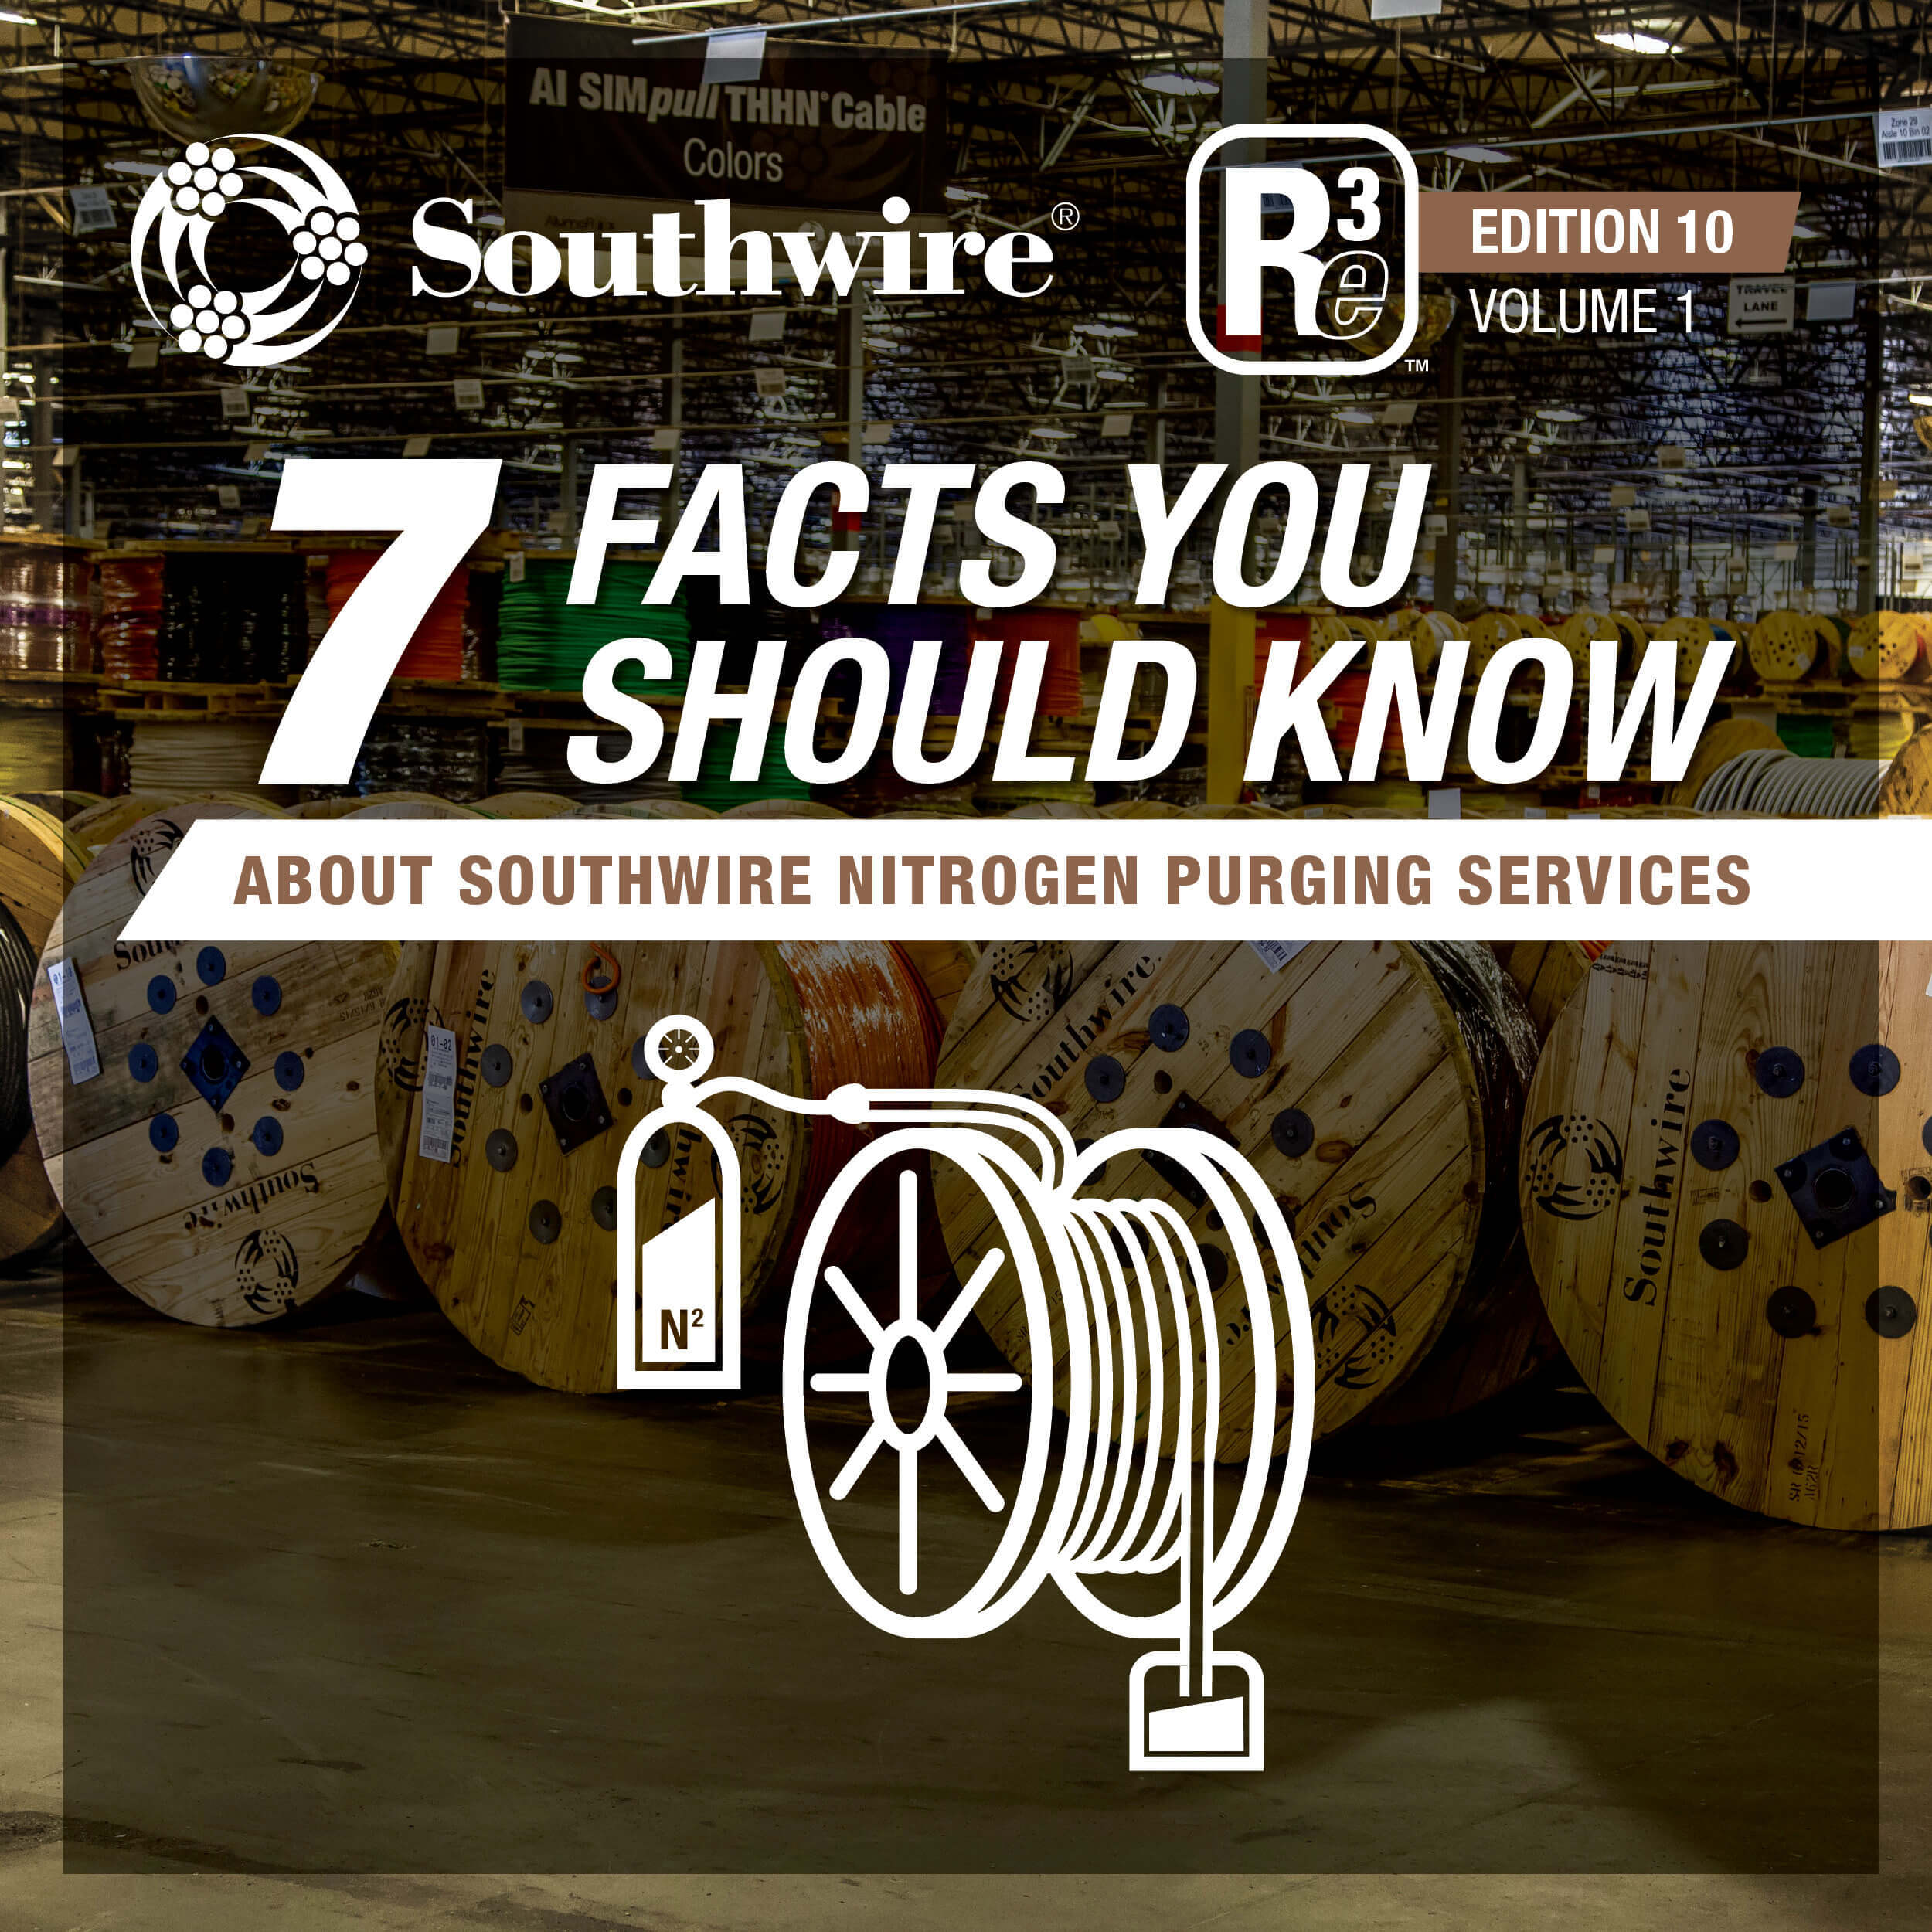 2208-Re3-7-Facts-You-Should-Know-About-SW-Nitrogen-Purging-Services-1-.jpg